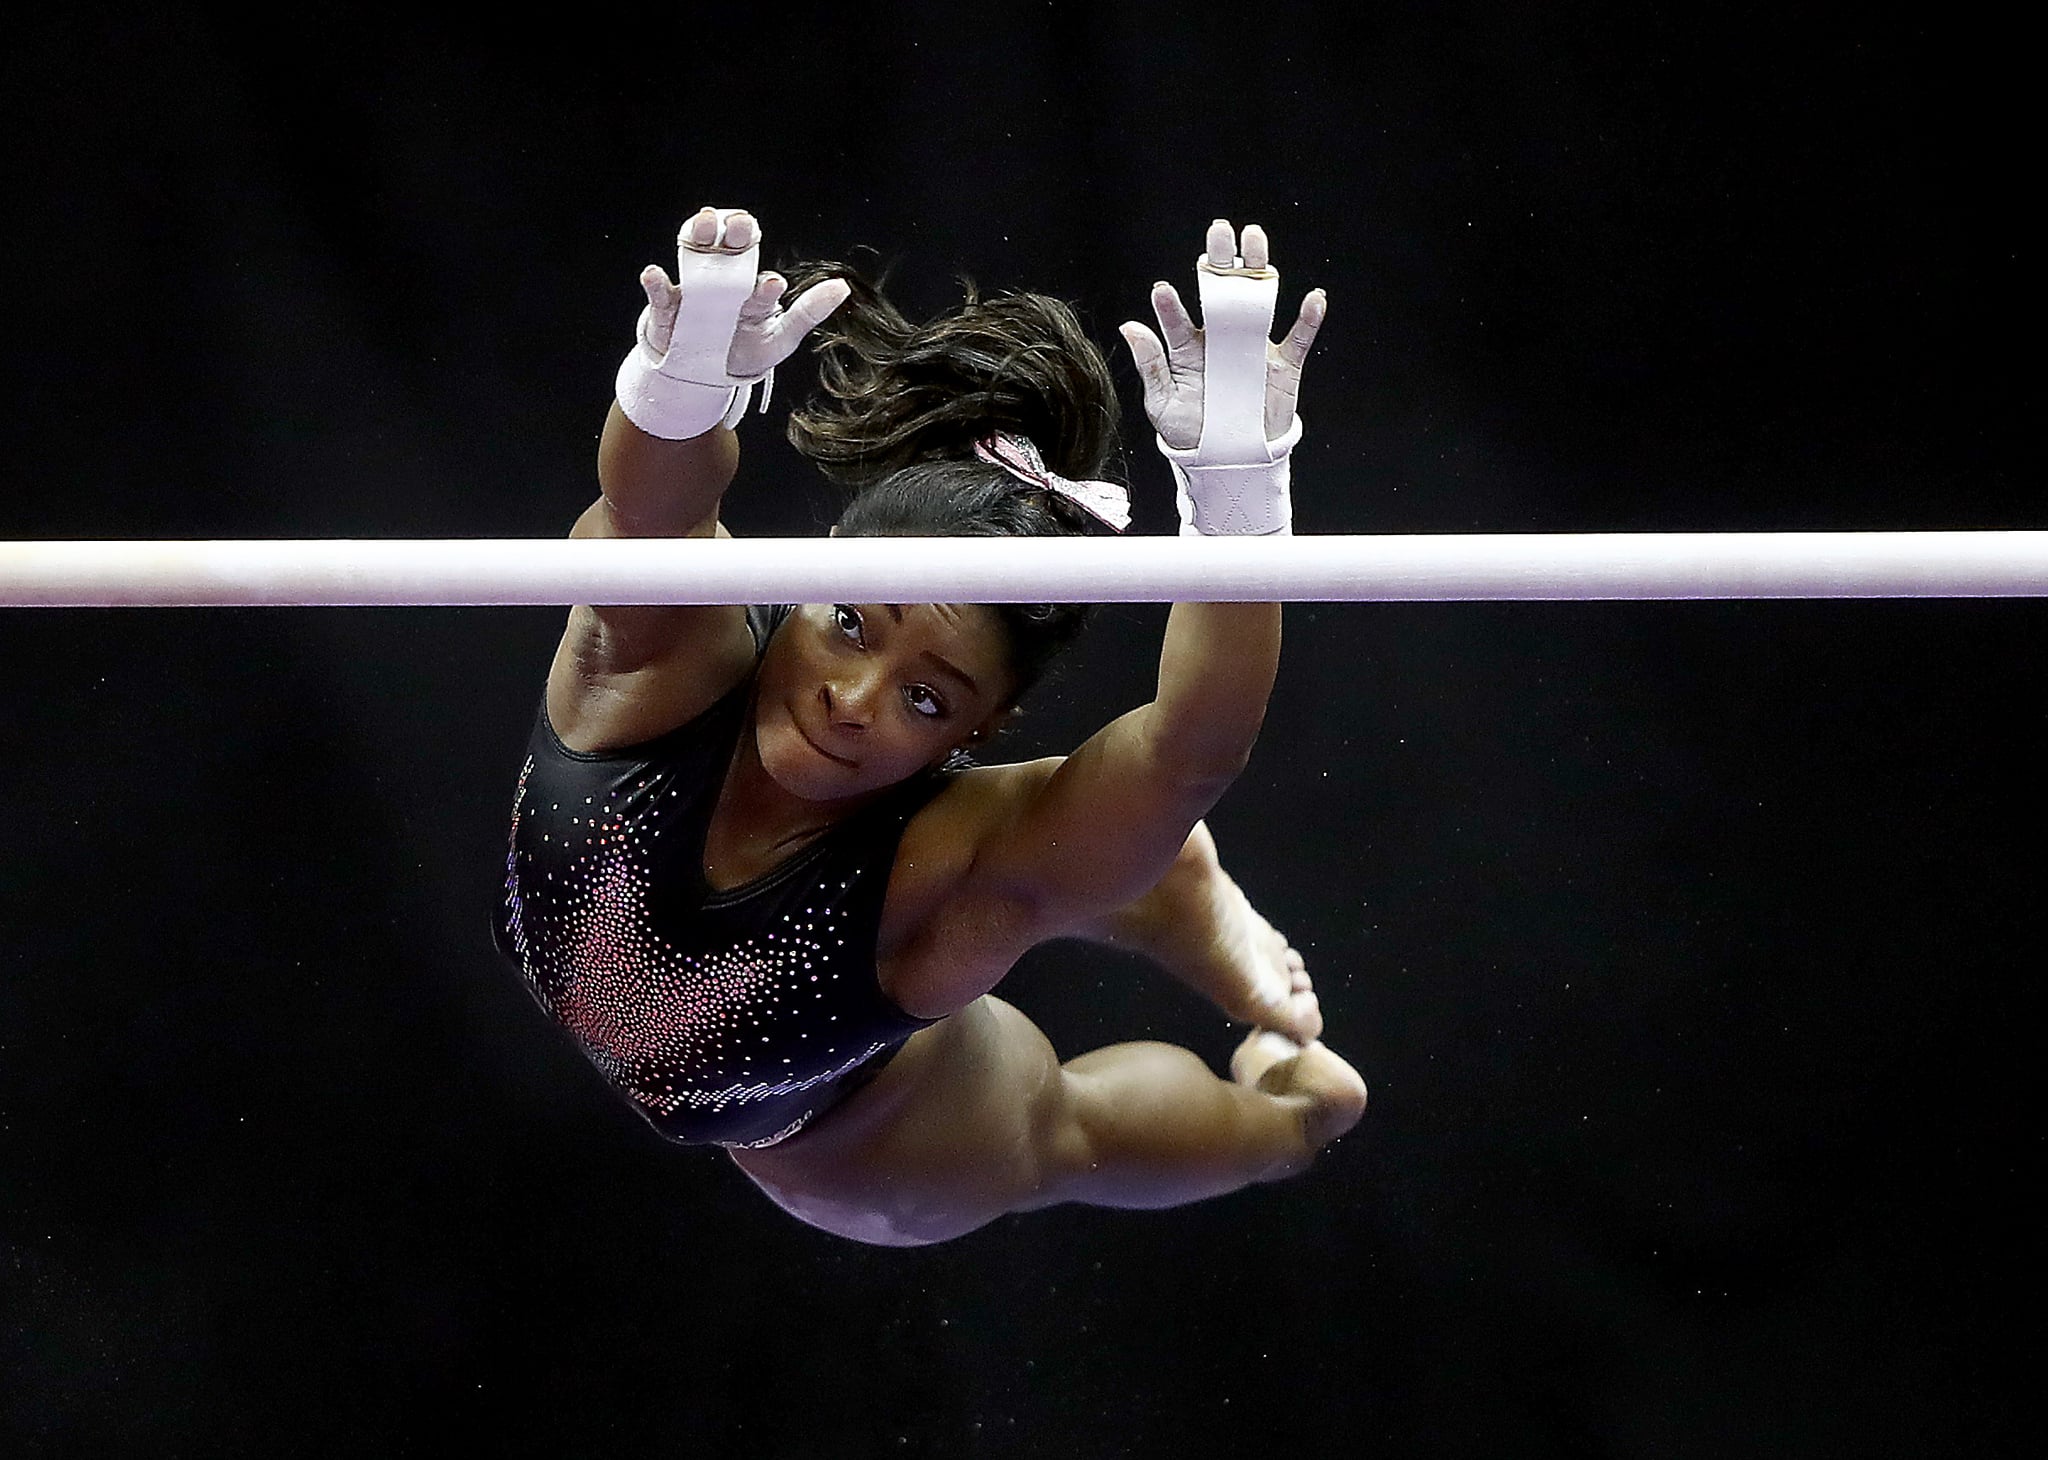 KANSAS CITY, MISSOURI - AUGUST 11:  Simone Biles warms up on the uneven bars prior to the Women's Senior competition of the 2019 U.S. Gymnastics Championships at the Sprint Center on August 11, 2019 in Kansas City, Missouri. (Photo by Jamie Squire/Getty Images)